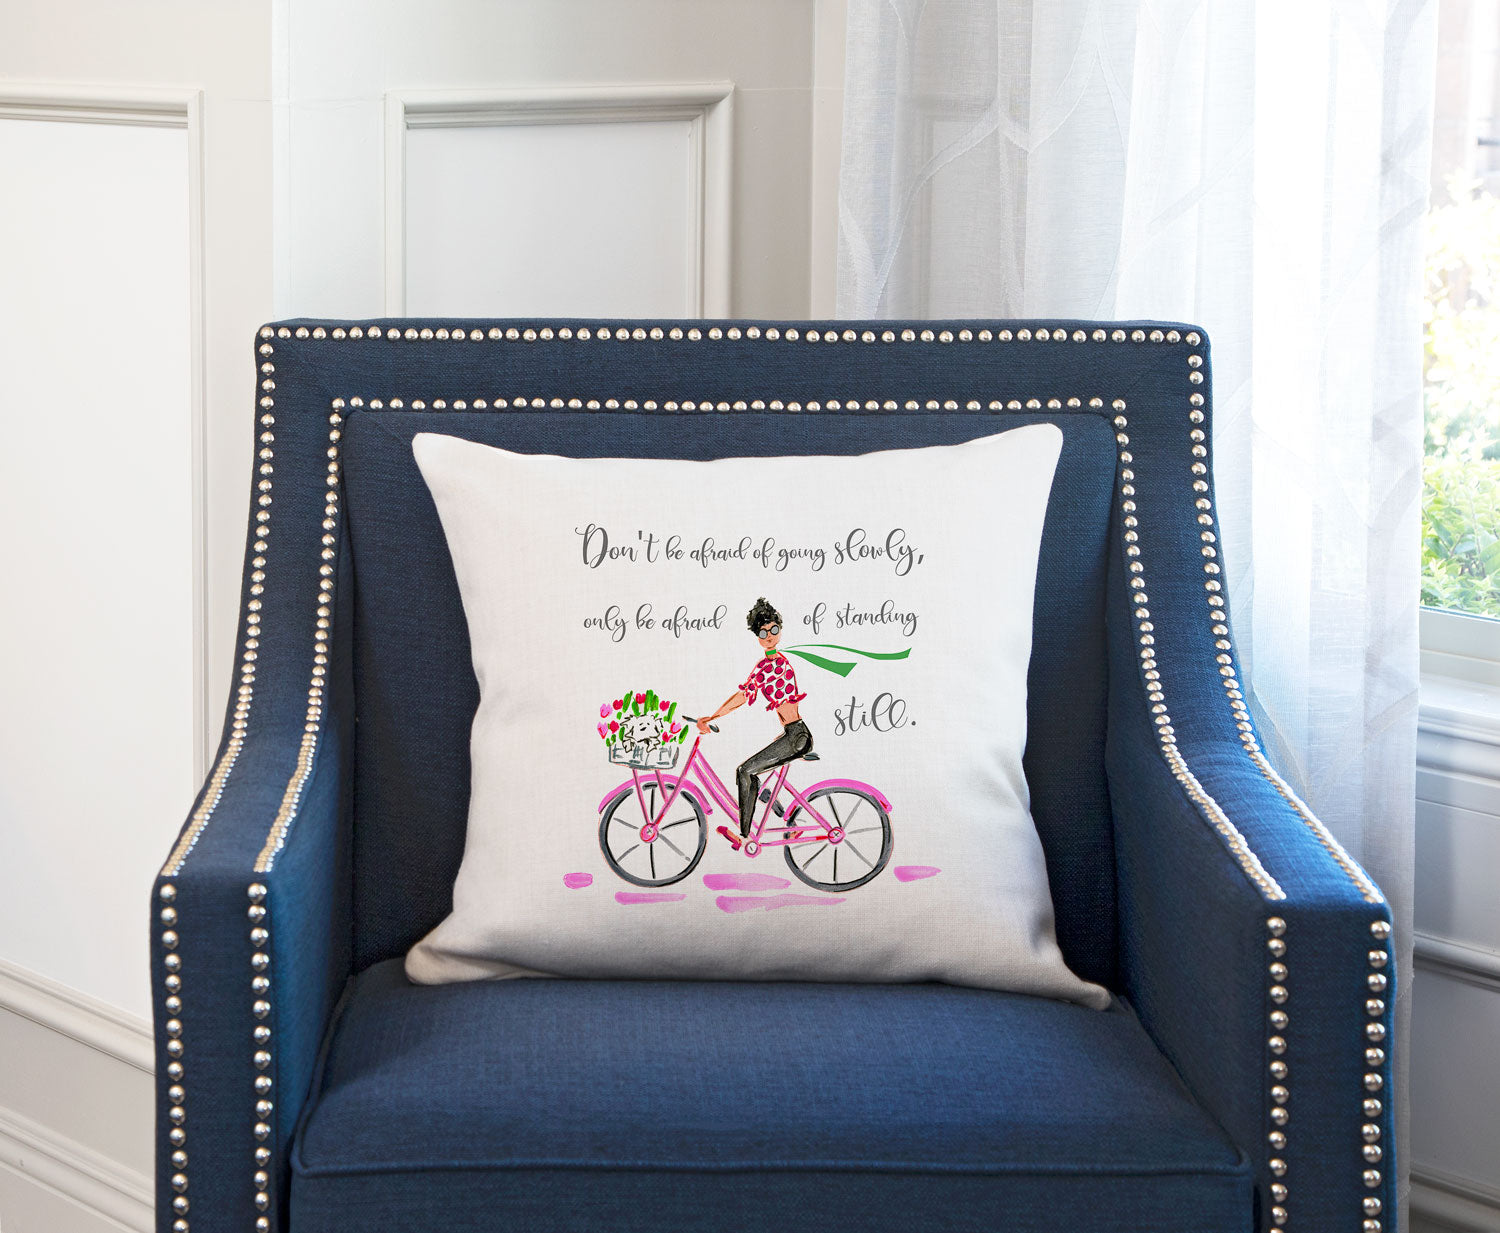 Moving Along Throw Pillow Cover - Fashion Illustrations Throw Pillow Cover Collection-Di Lewis